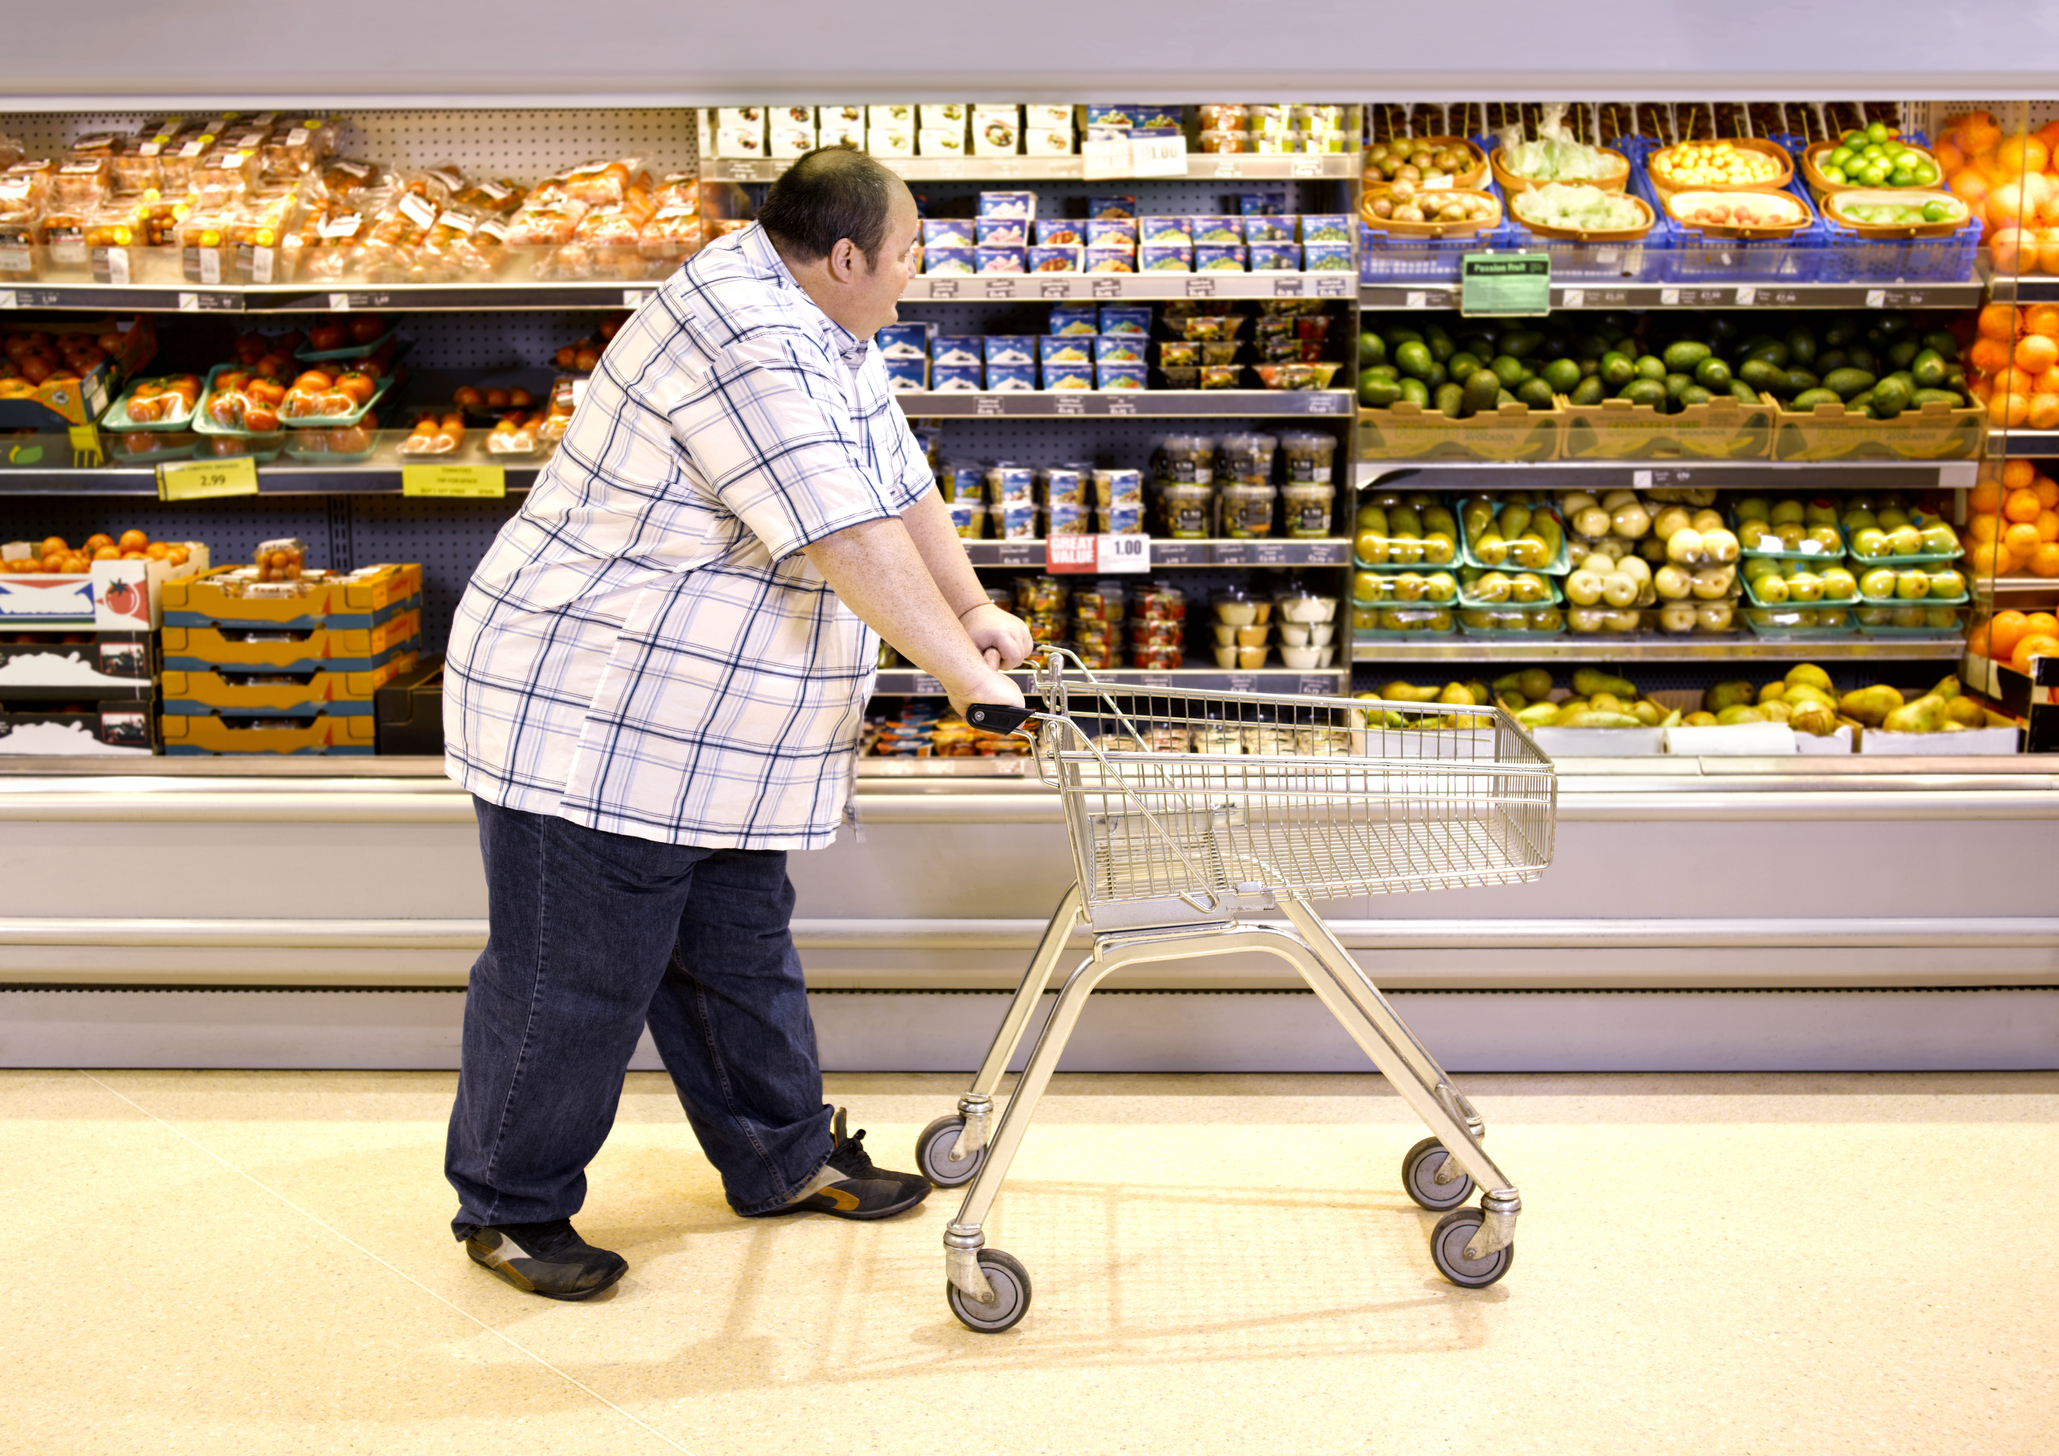 Overweight man passing by healthy food